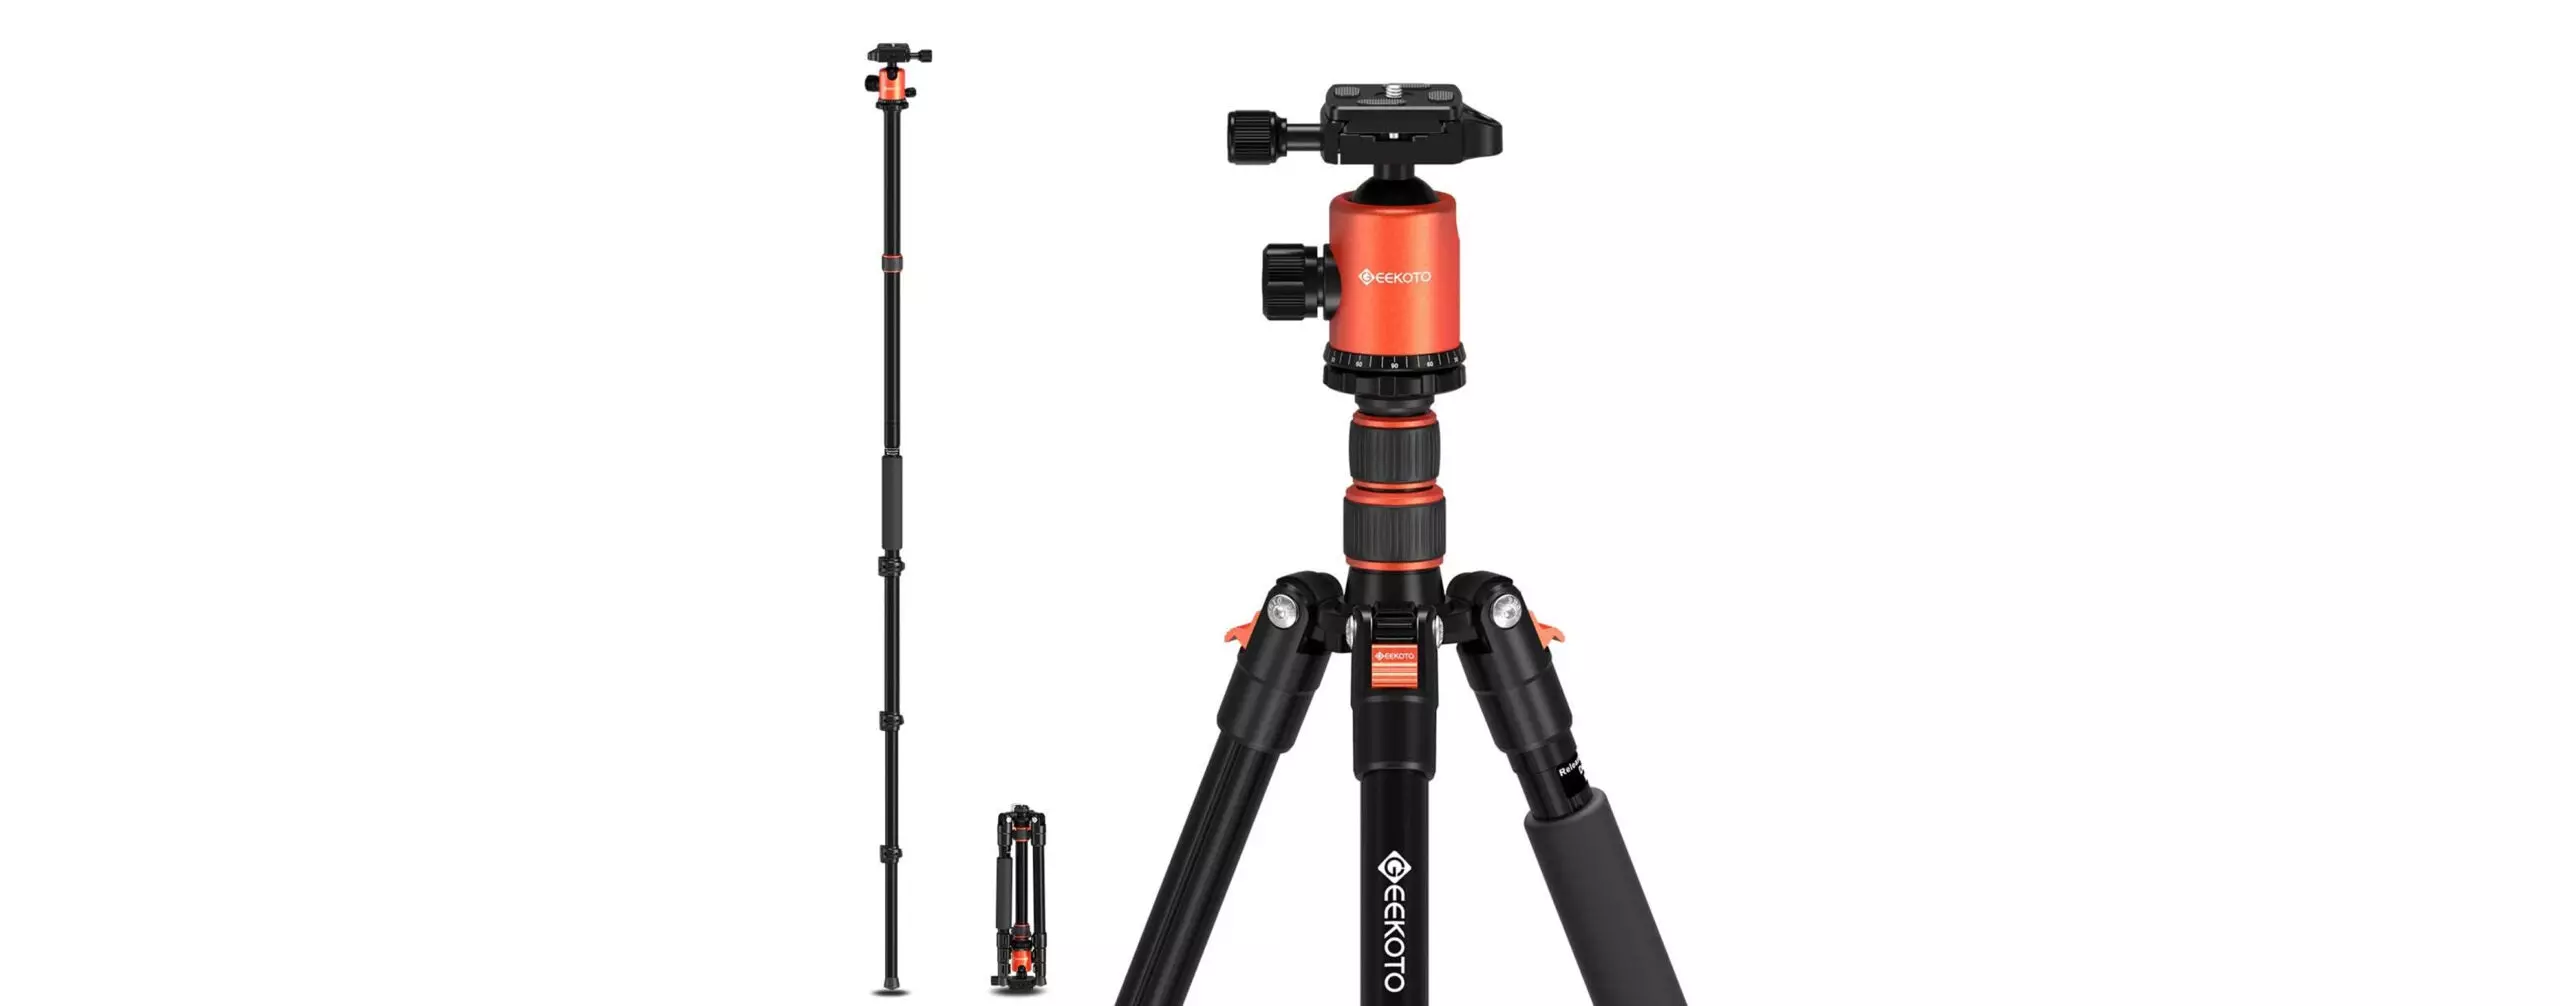 The Best Hiking Tripods (Review and Buying Guide) in 2022